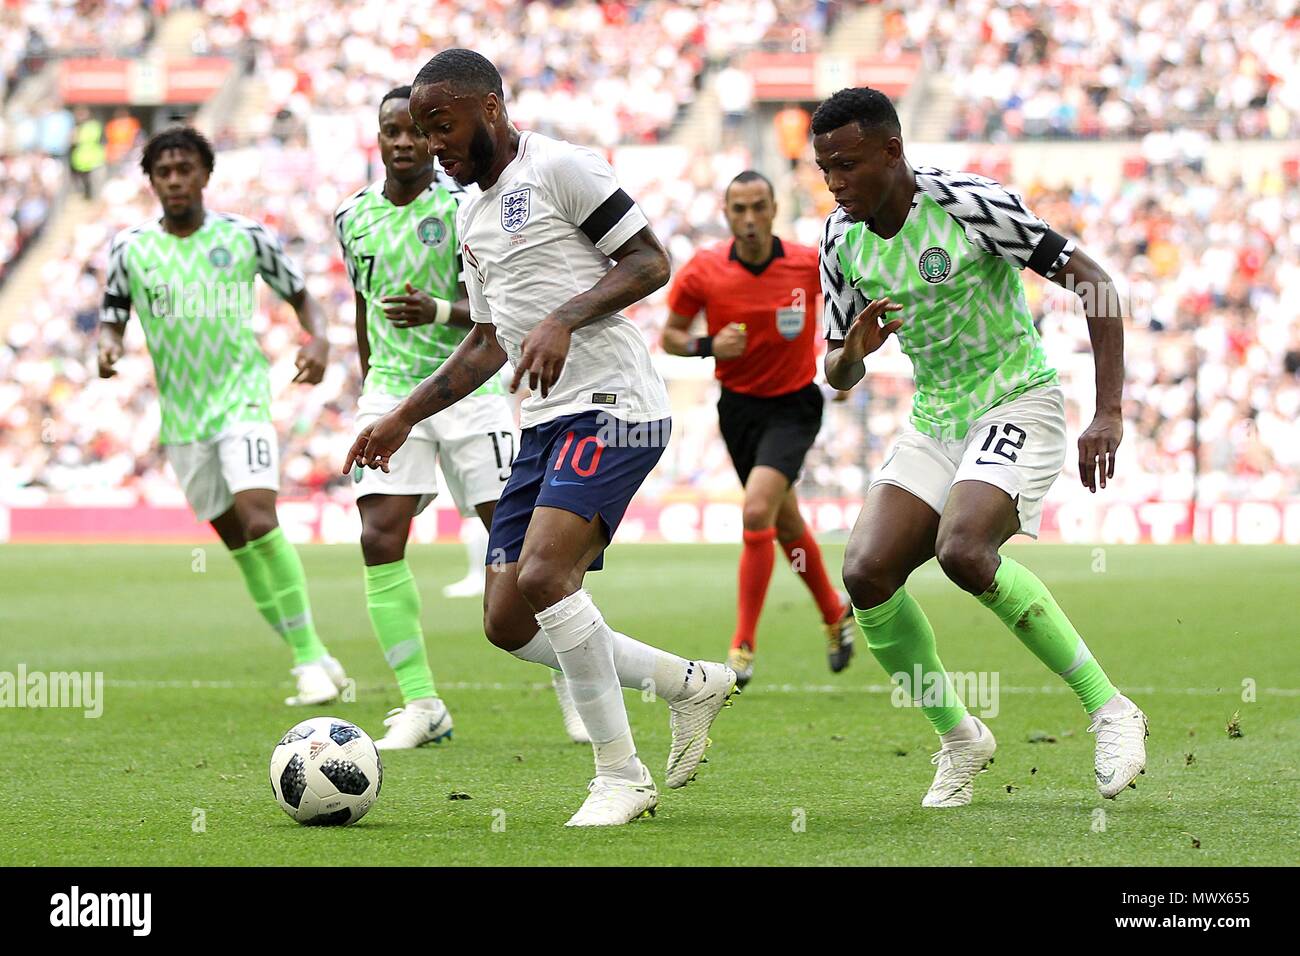 London, UK. 2nd June 2018. London, UK. 2nd June 2018. Raheem Sterling of England goes past Shehu Abdullahi of Nigeria during the International Friendly match between England and Nigeria at Wembley Stadium on June 2nd 2018 in London, England. (Photo by Matt Bradshaw/phcimages.com) Credit: PHC Images/Alamy Live News Stock Photo